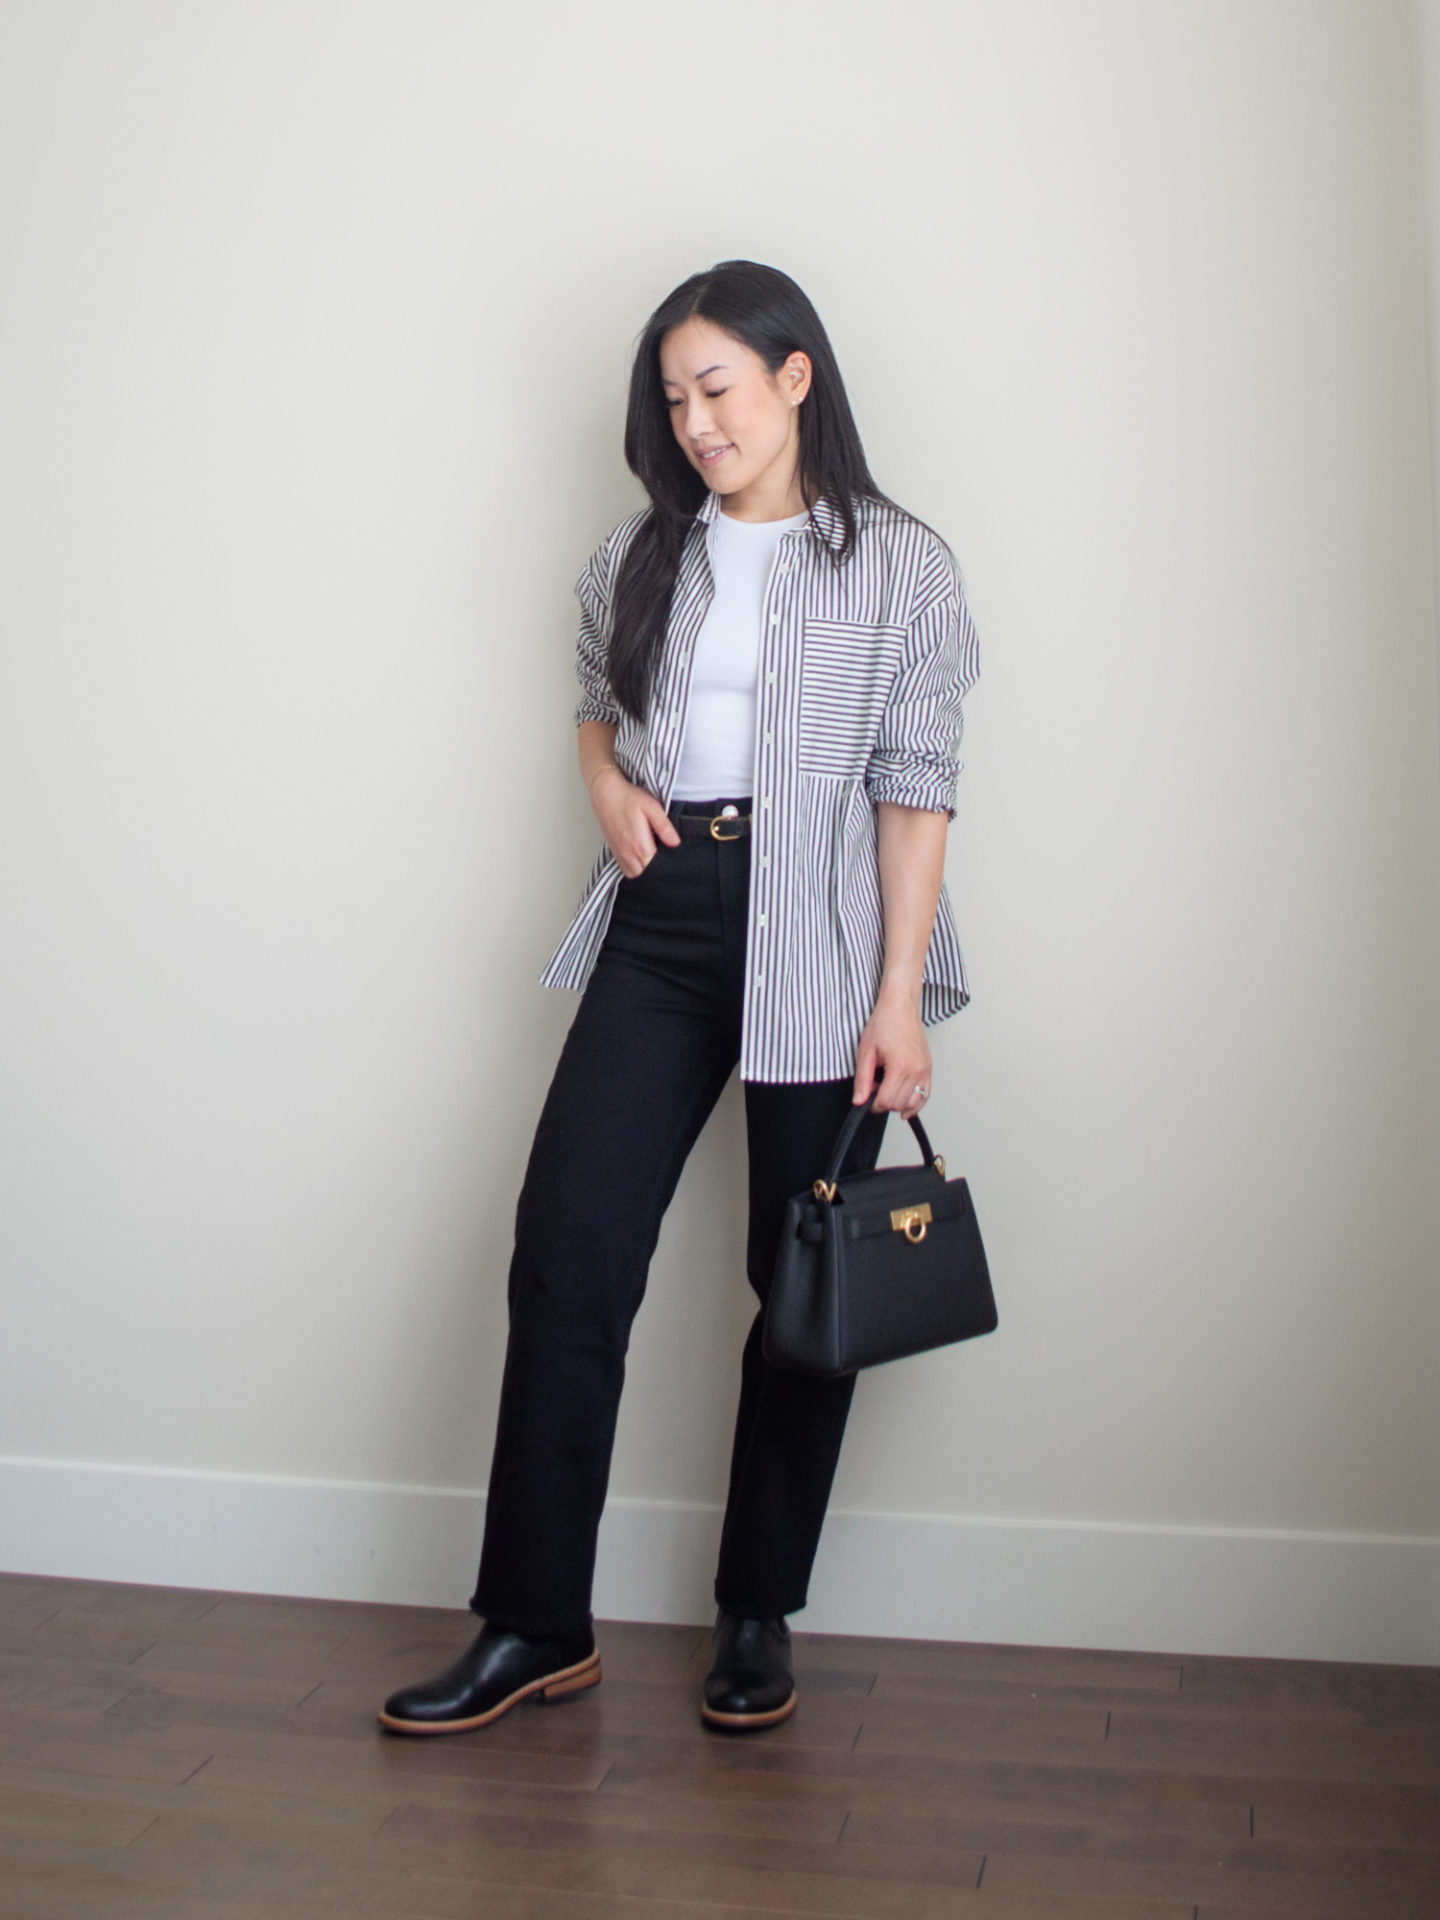 New Everlane Staples - Fall Wardrobe Essentials and How to Style - Her ...